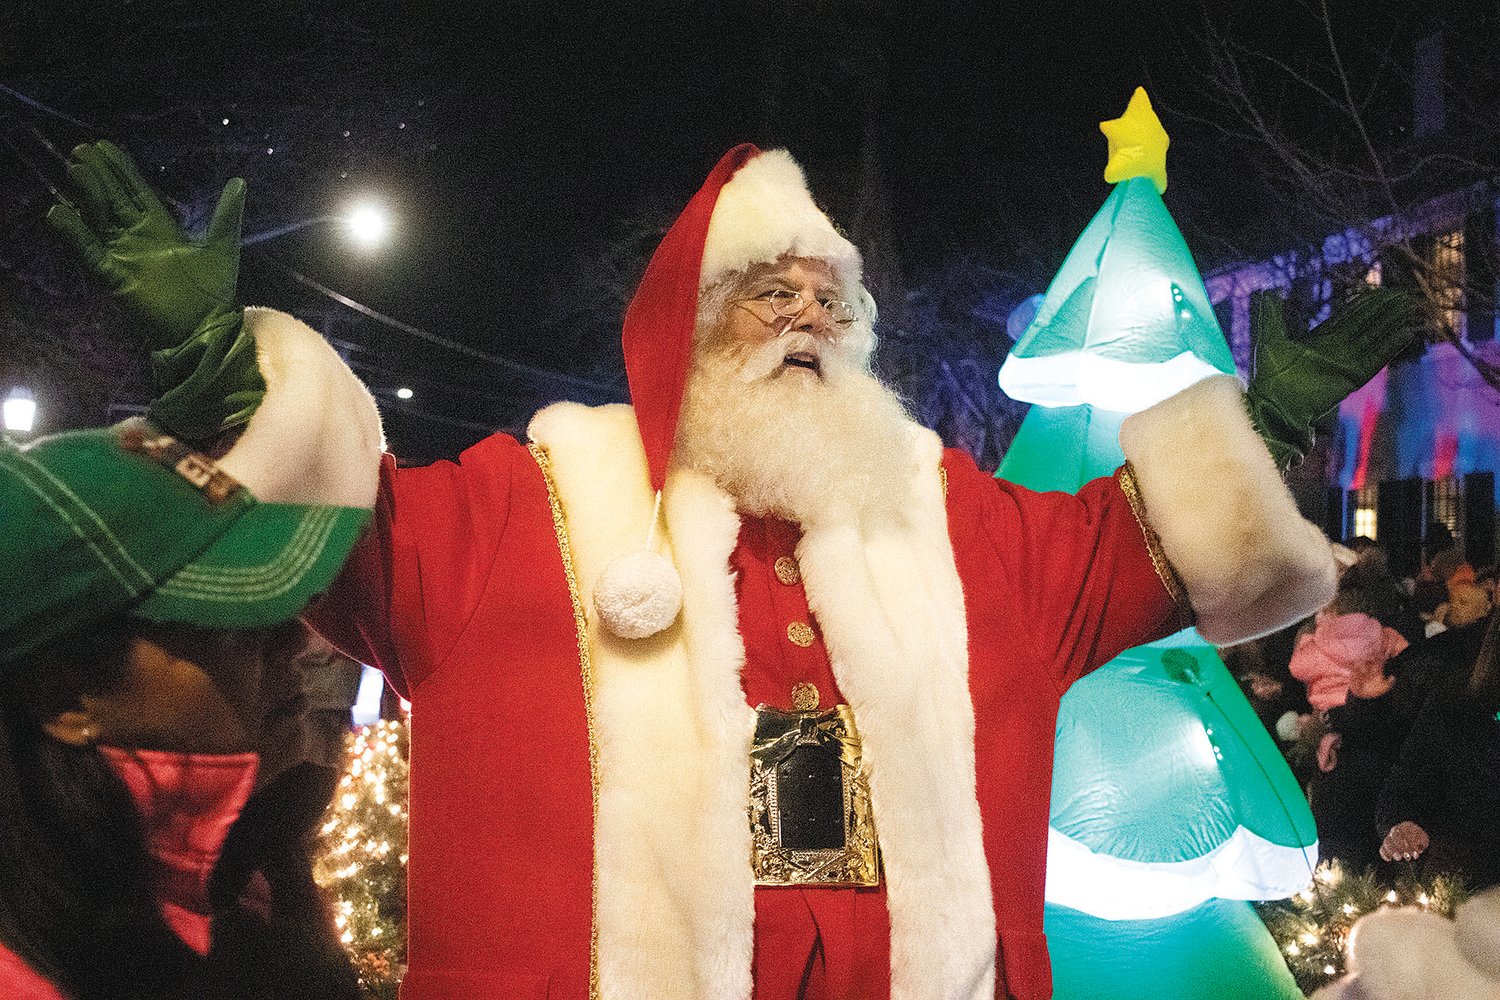 Santa Claus, played by Michael Rielly, arrives to greet the crowds at Bristol’s Grand Illumination Sunday night. Rielly led the town’s Christmas Festival in recent years, before handing the reins to new leadership this year. He and his James D. Rielly Foundation are organizing a new Santa House that is open to visitors throughout the month of December in downtown Bristol.